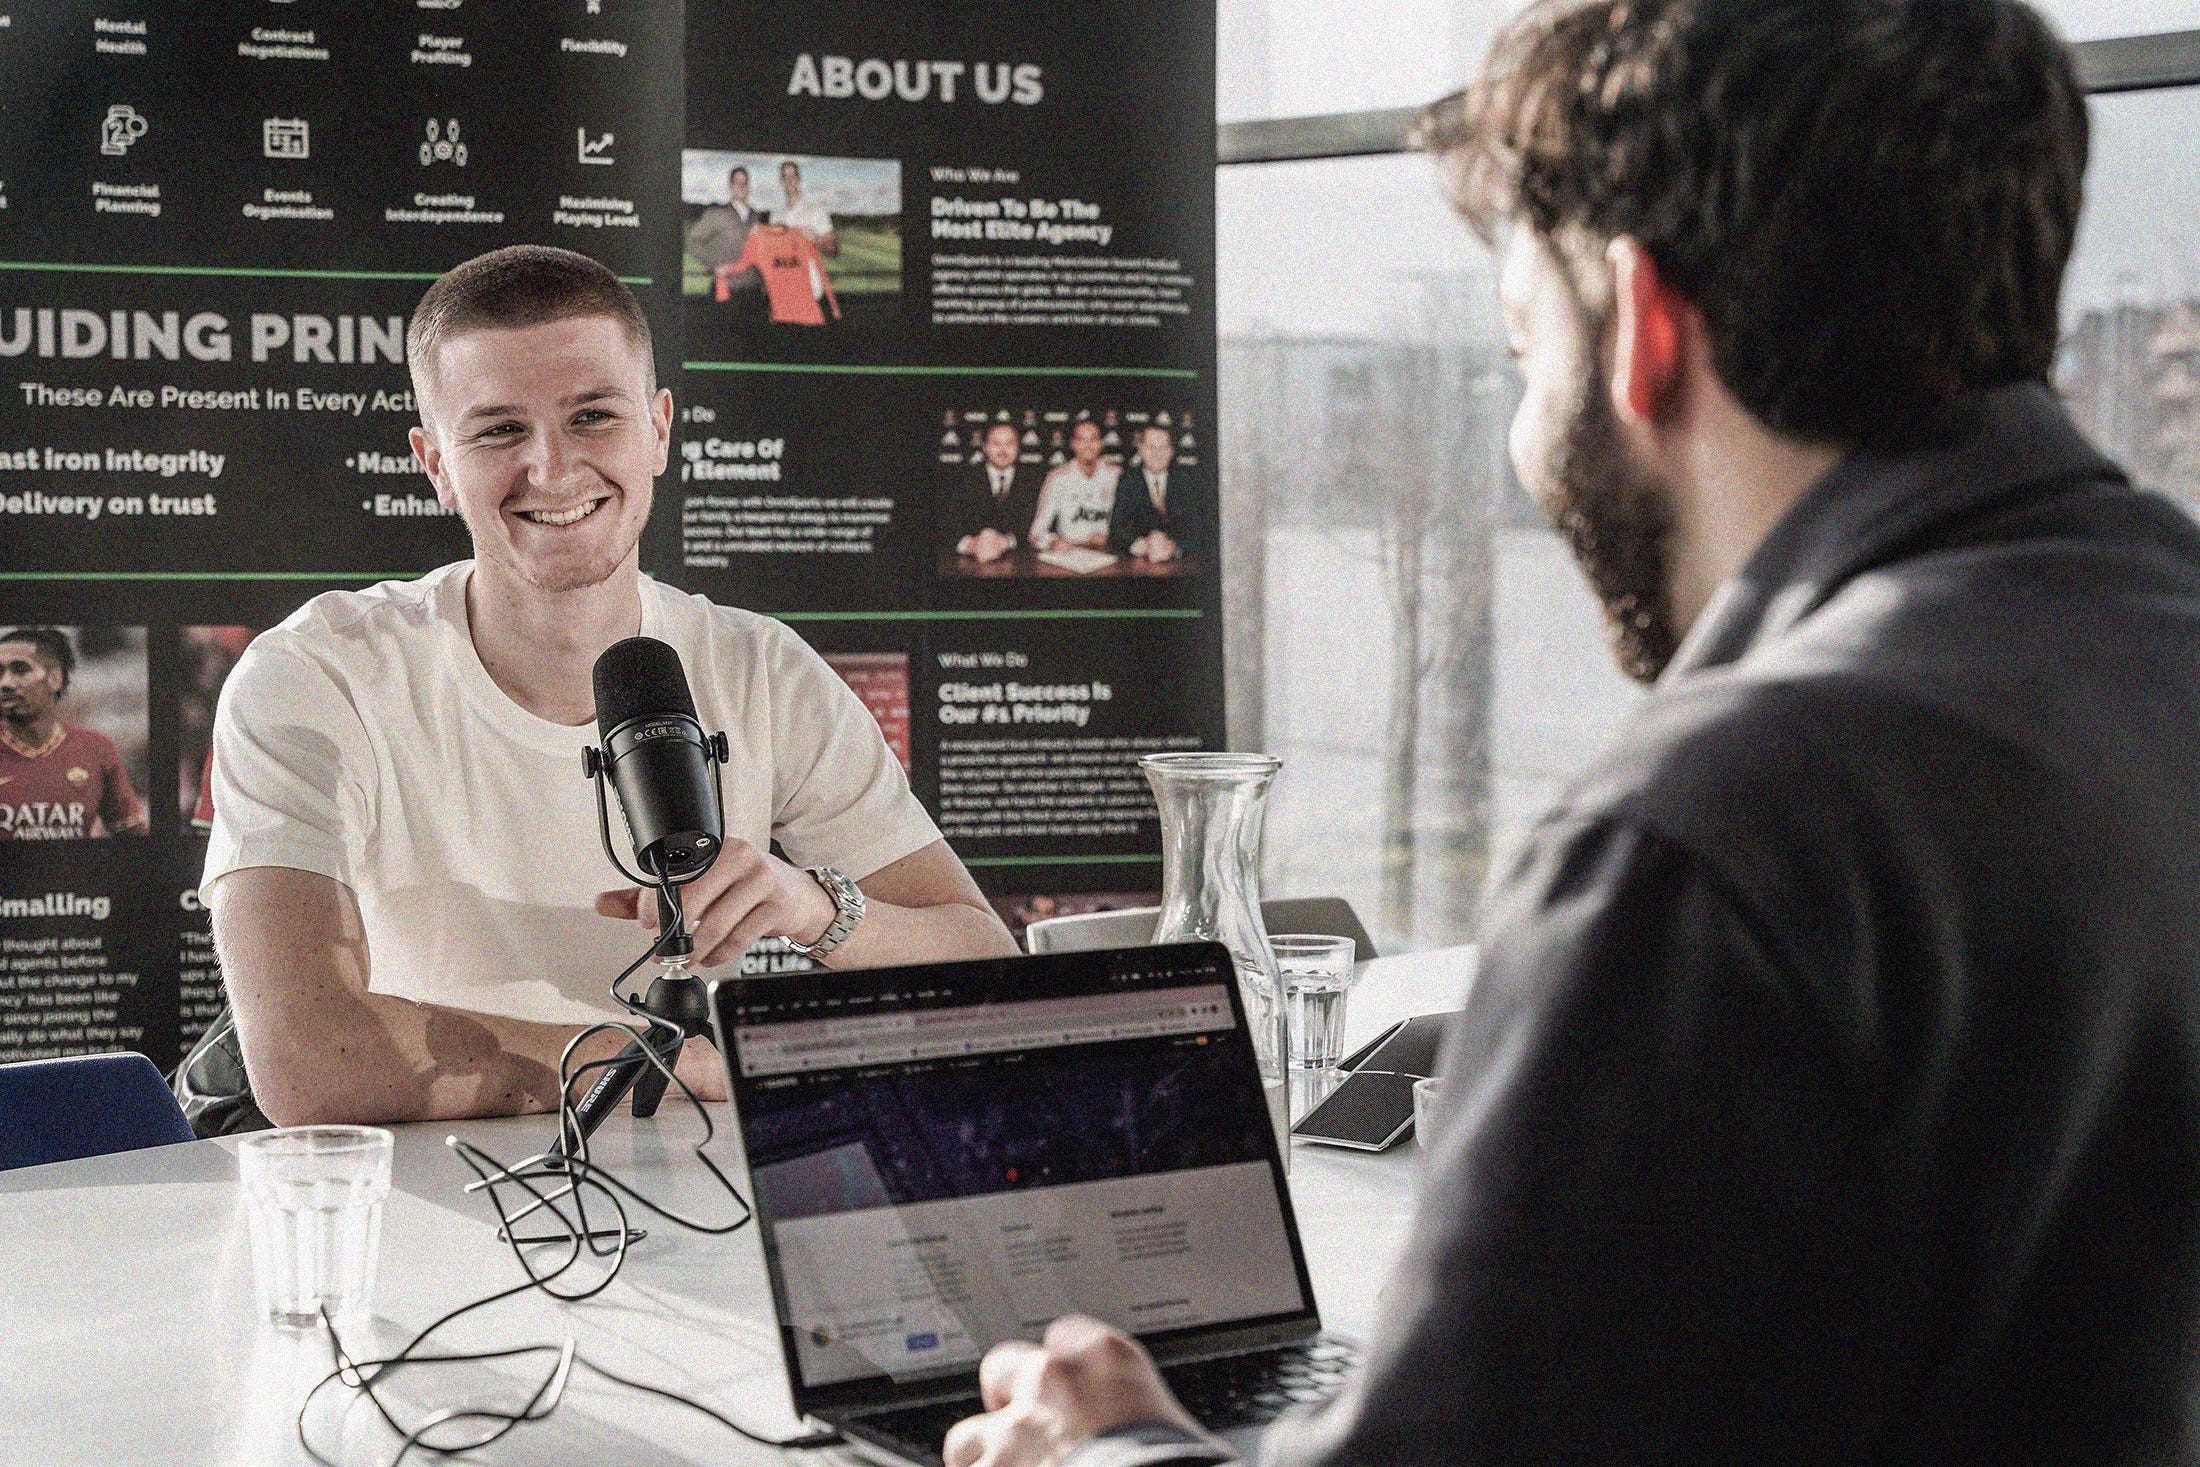 A photo of a smiling Adam Wharton sat at a white table in front of a microphone. In the foreground is Phil Costa, SCOUTED journalist, sat at a laptop.